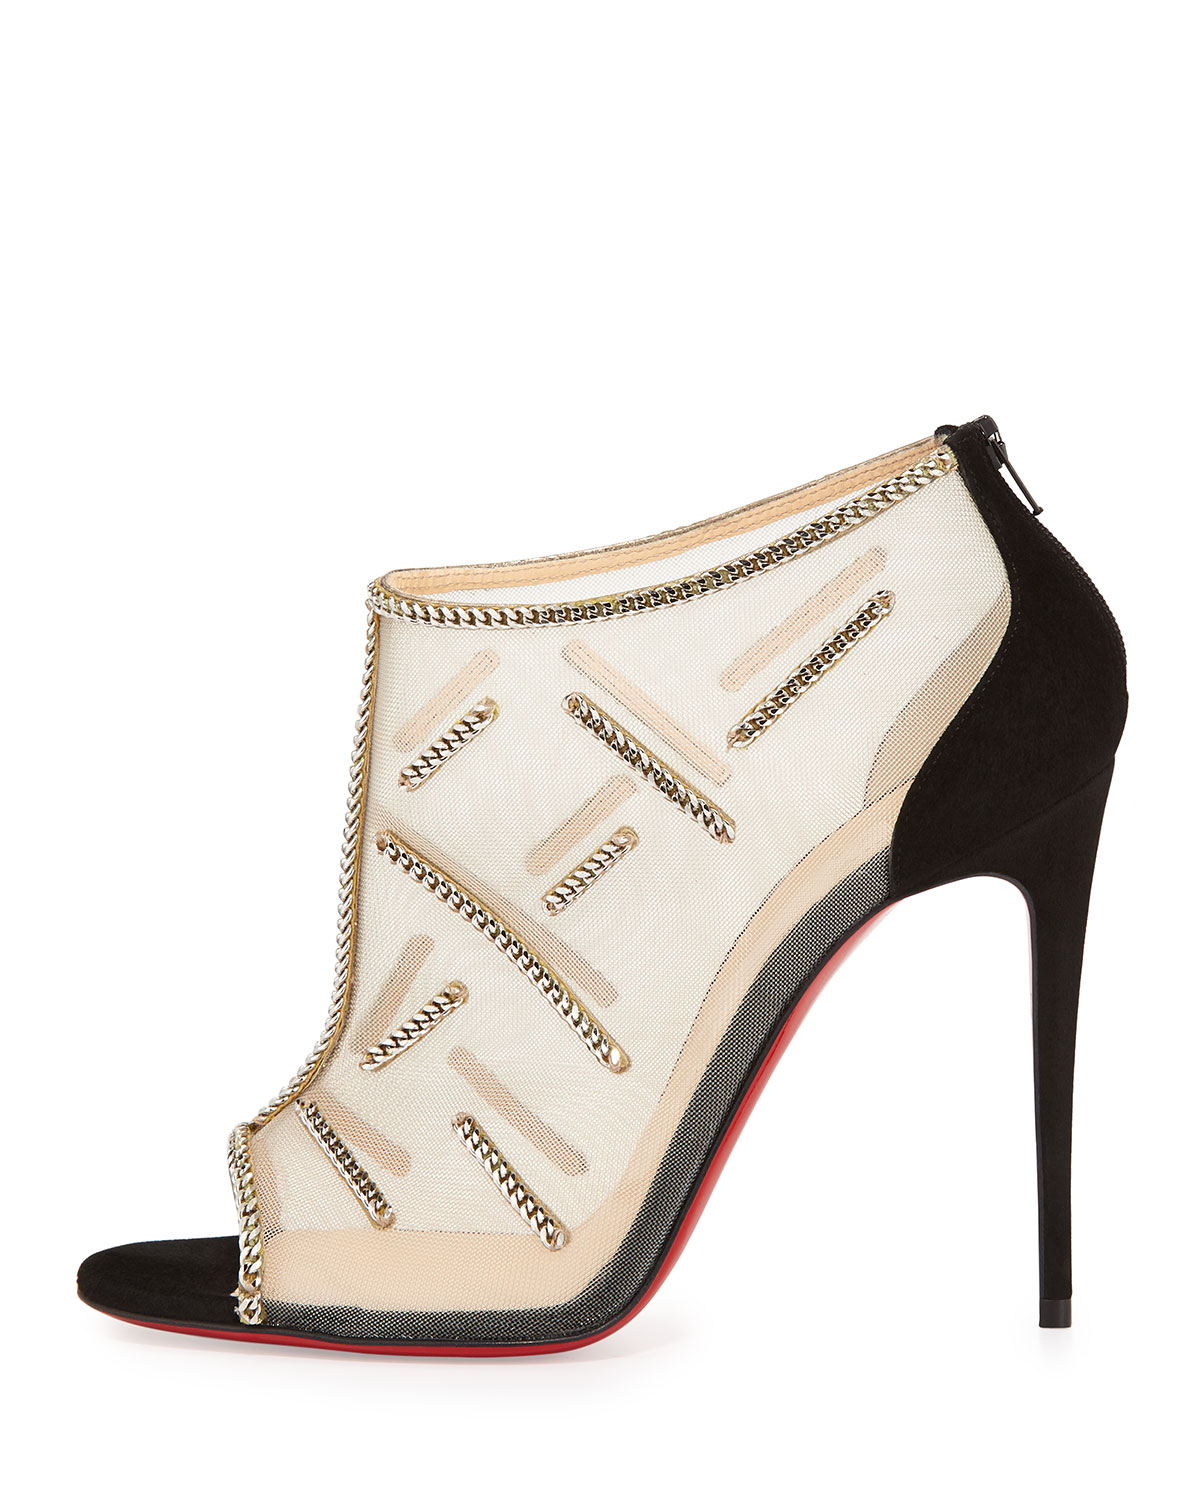 christian louboutin knockoff - Christian louboutin Signifiamma Embellished Mesh Pumps in Silver ...